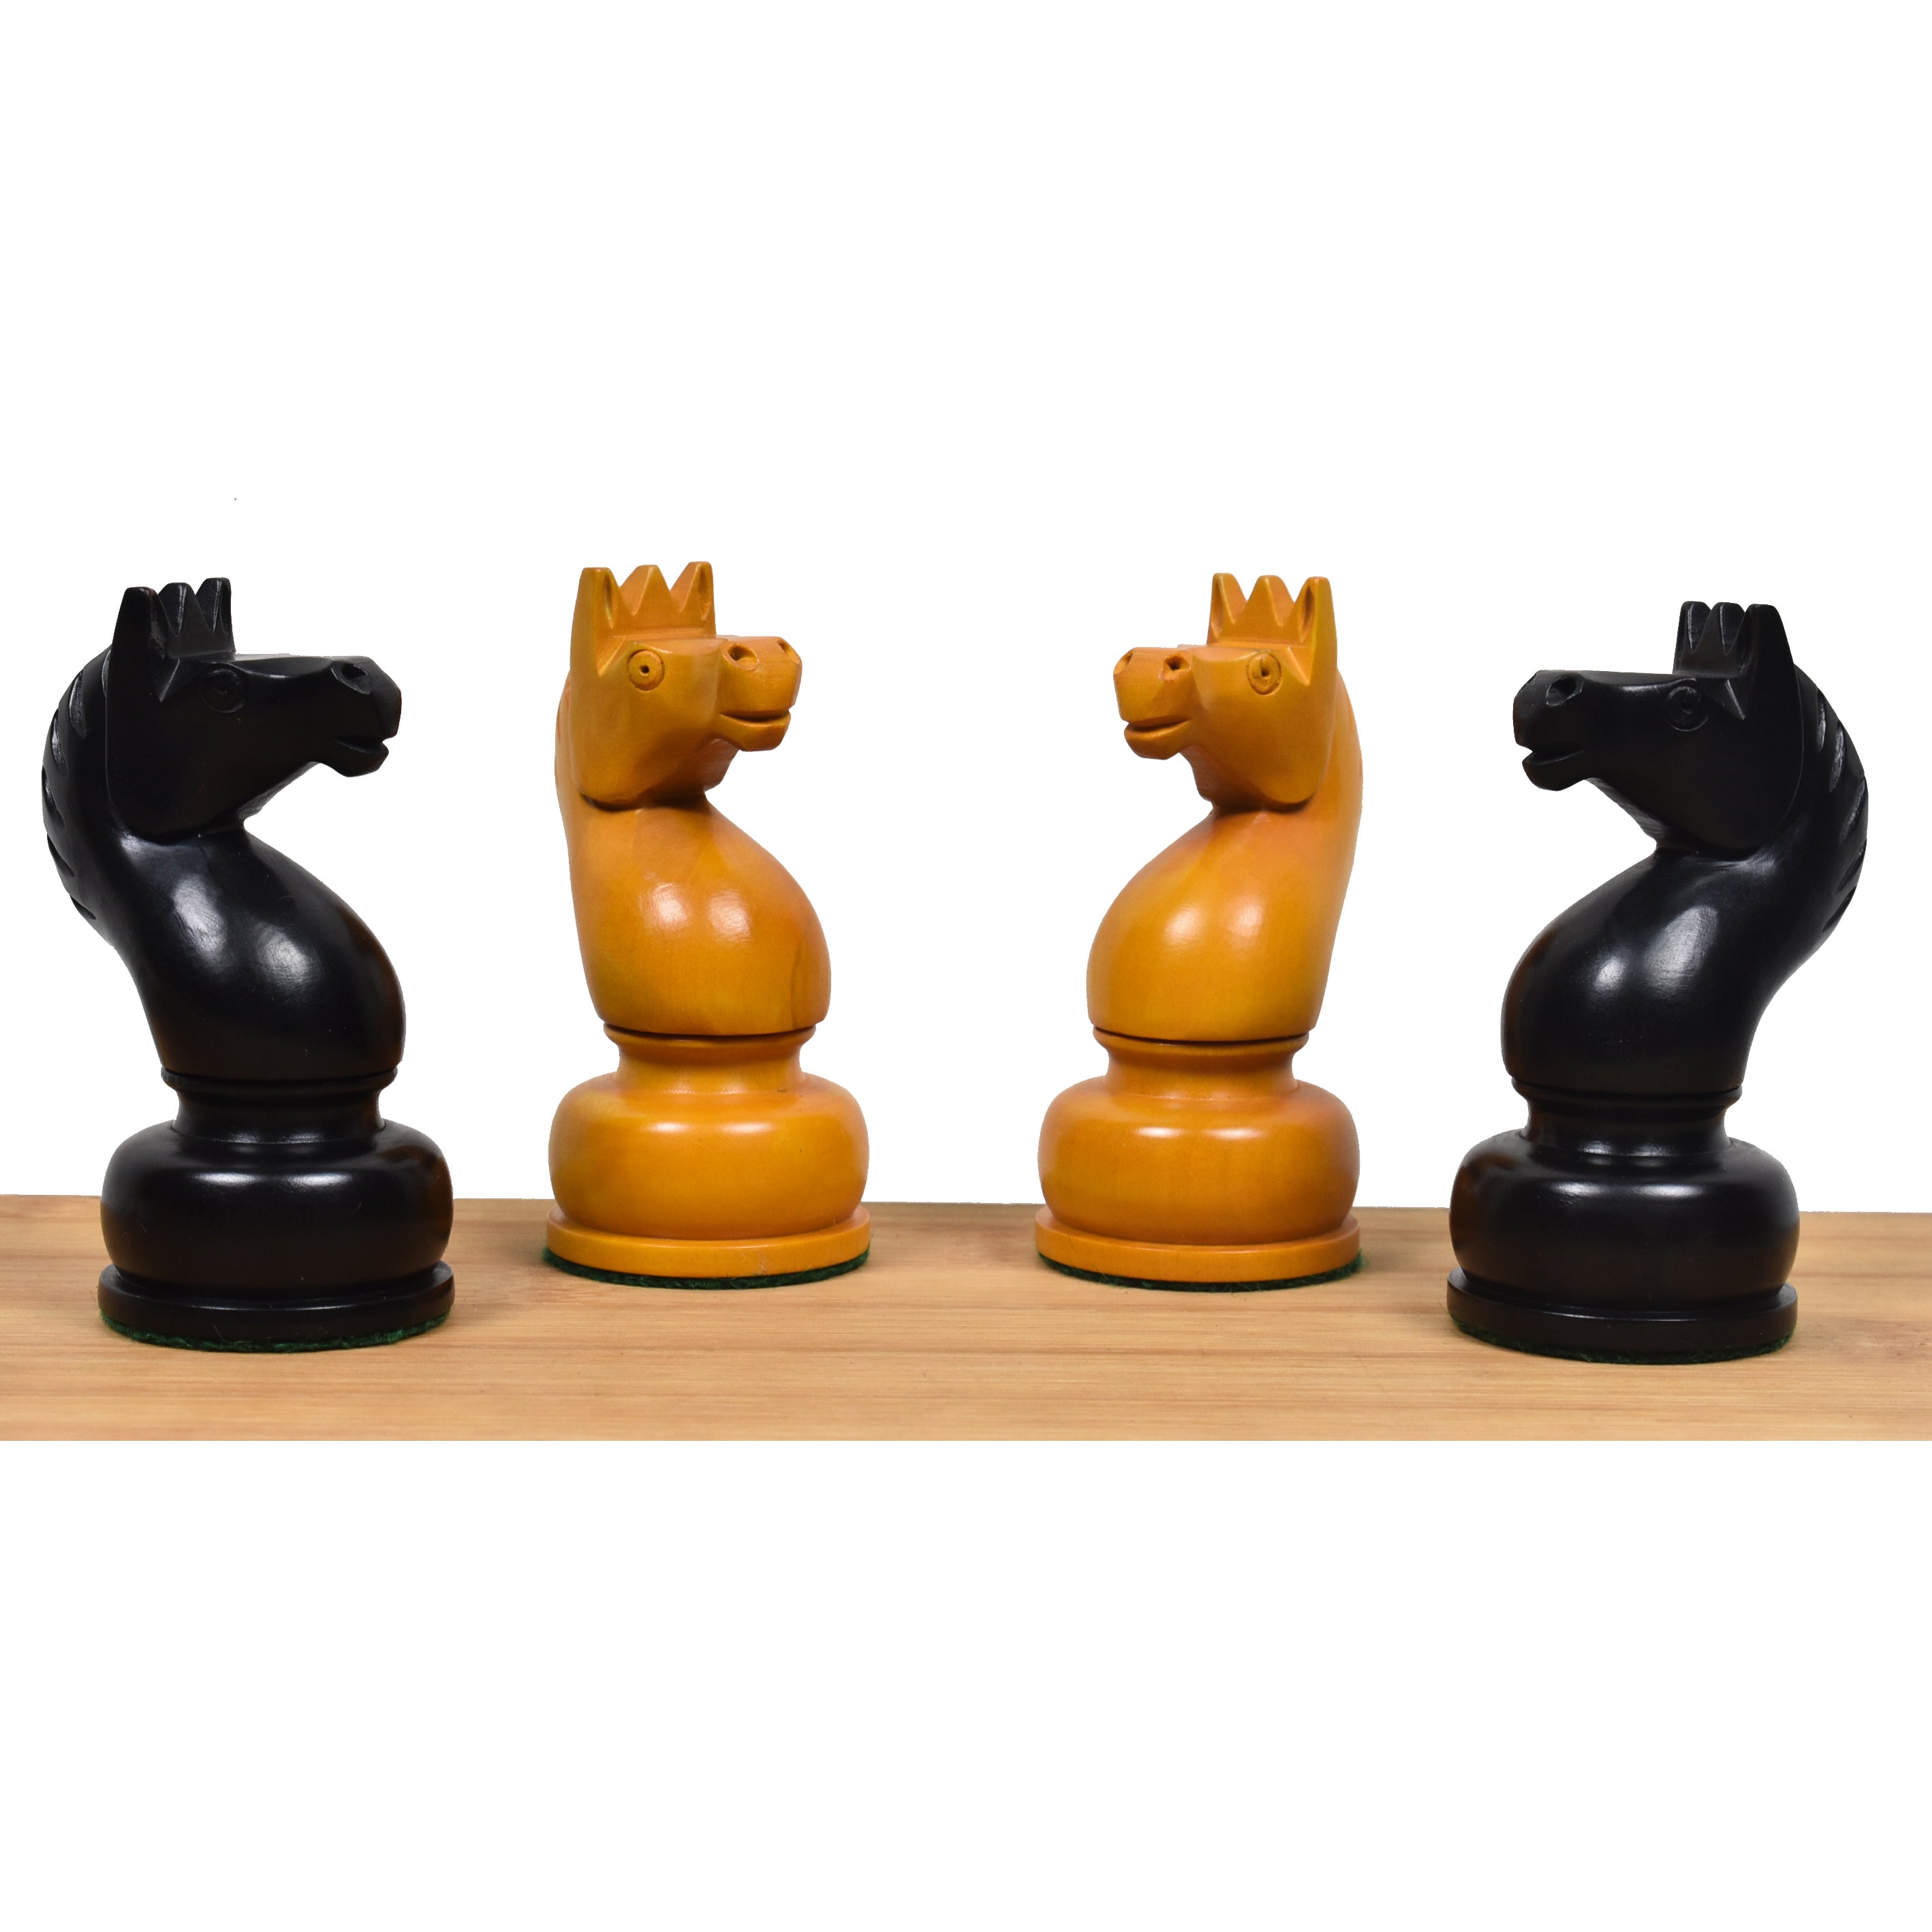 Slightly Imperfect 1960's Soviet Championship Tal Chess Pieces - Antiqued Boxwood- 4" King